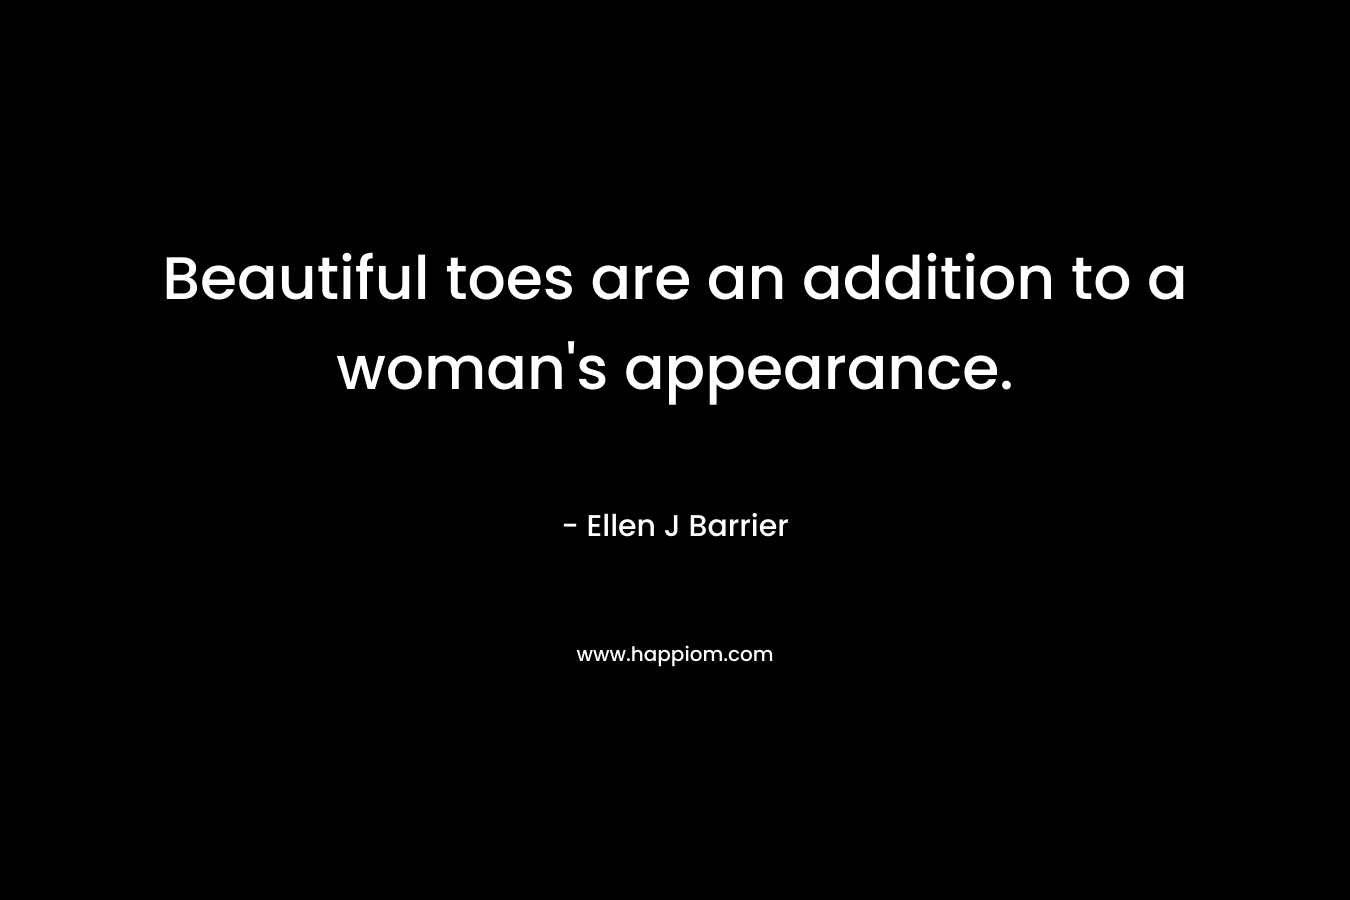 Beautiful toes are an addition to a woman’s appearance. – Ellen J Barrier